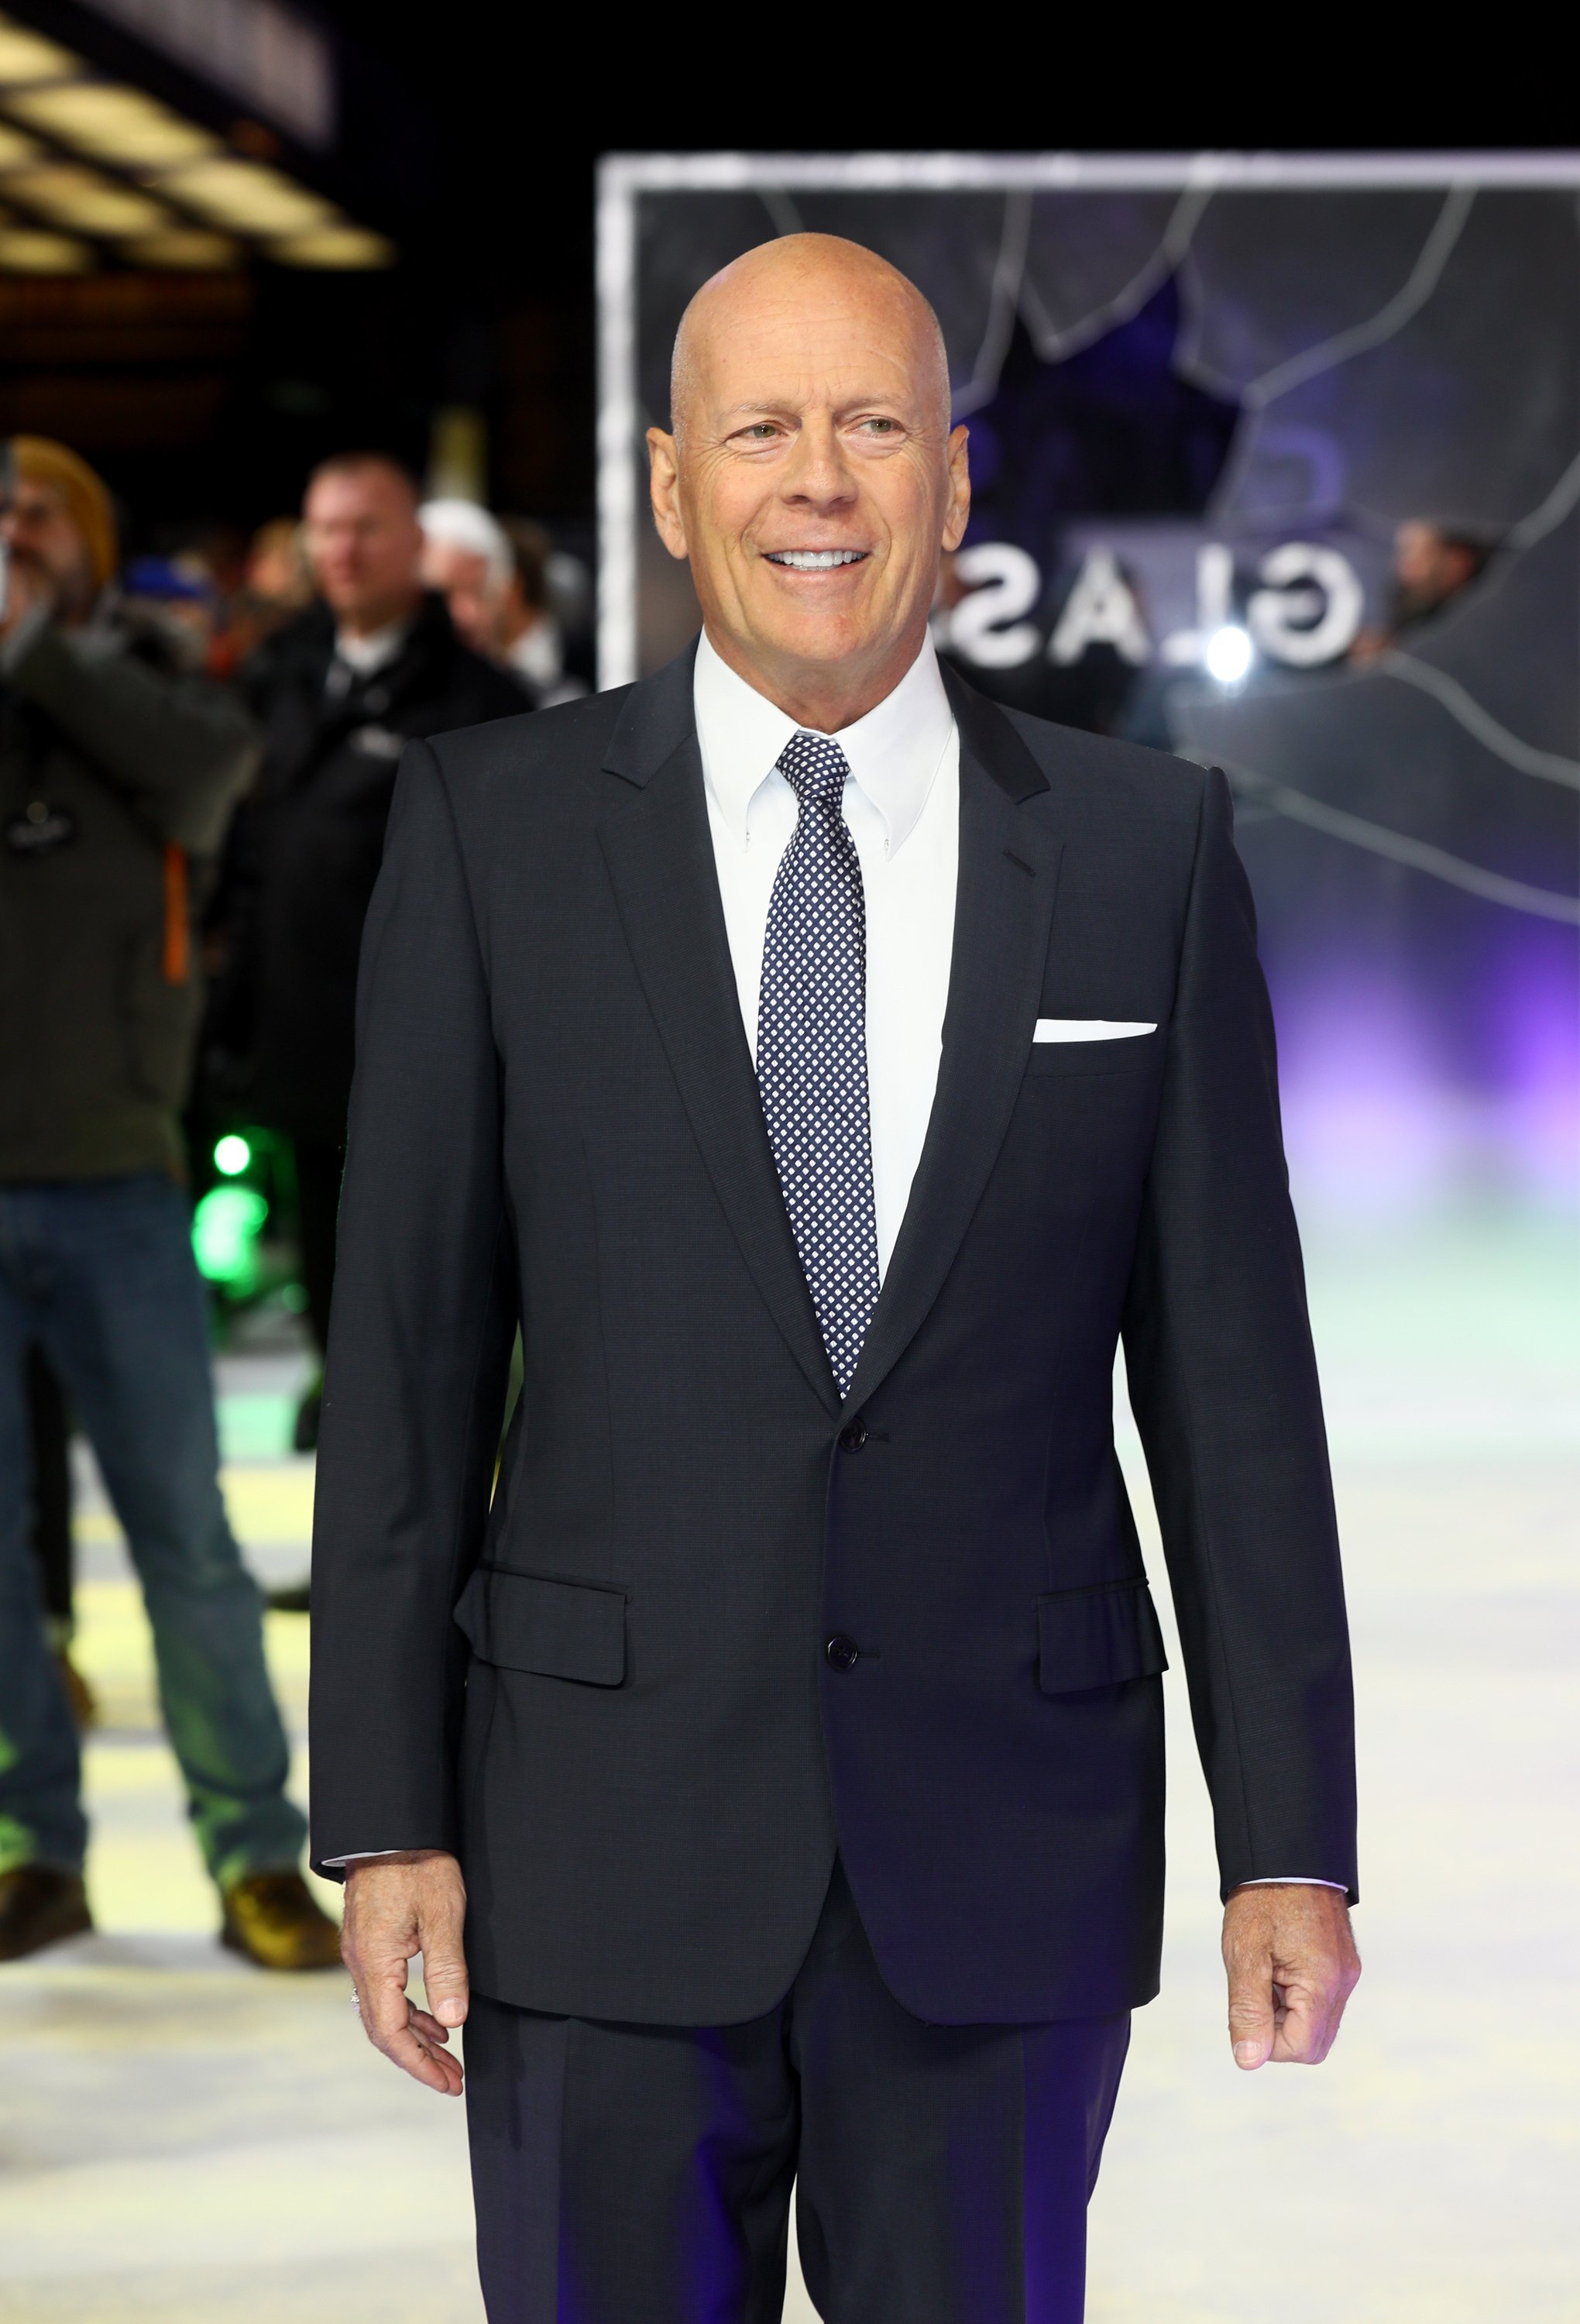 Bruce Willis attends the UK Premiere of M. Night Shyamalan's all-new comic-book thriller "Glass" at Curzon Cinema Mayfair on January 9, 2019, in London, England. | Source: Getty Images.